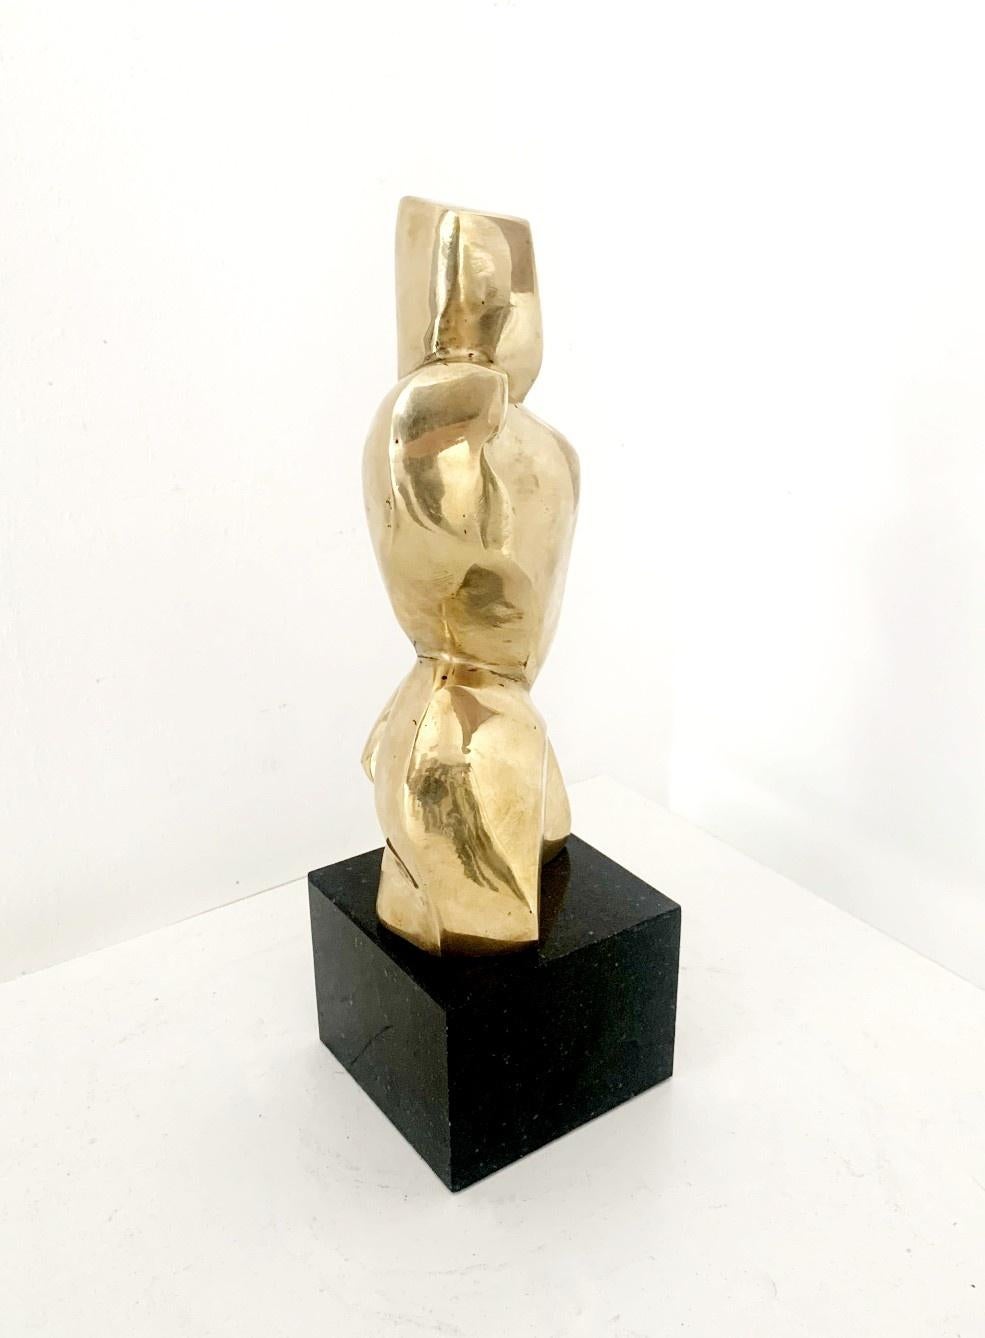 Dimensions are given with the base

RYSZARD PIOTROWSKI (born in 1952) Sculptor. He graduated from the Academy of Fine Arts in Warsaw. His works include intimate, small forms in marble, bronze and silver. He specializes in repoussage. In the 1970s